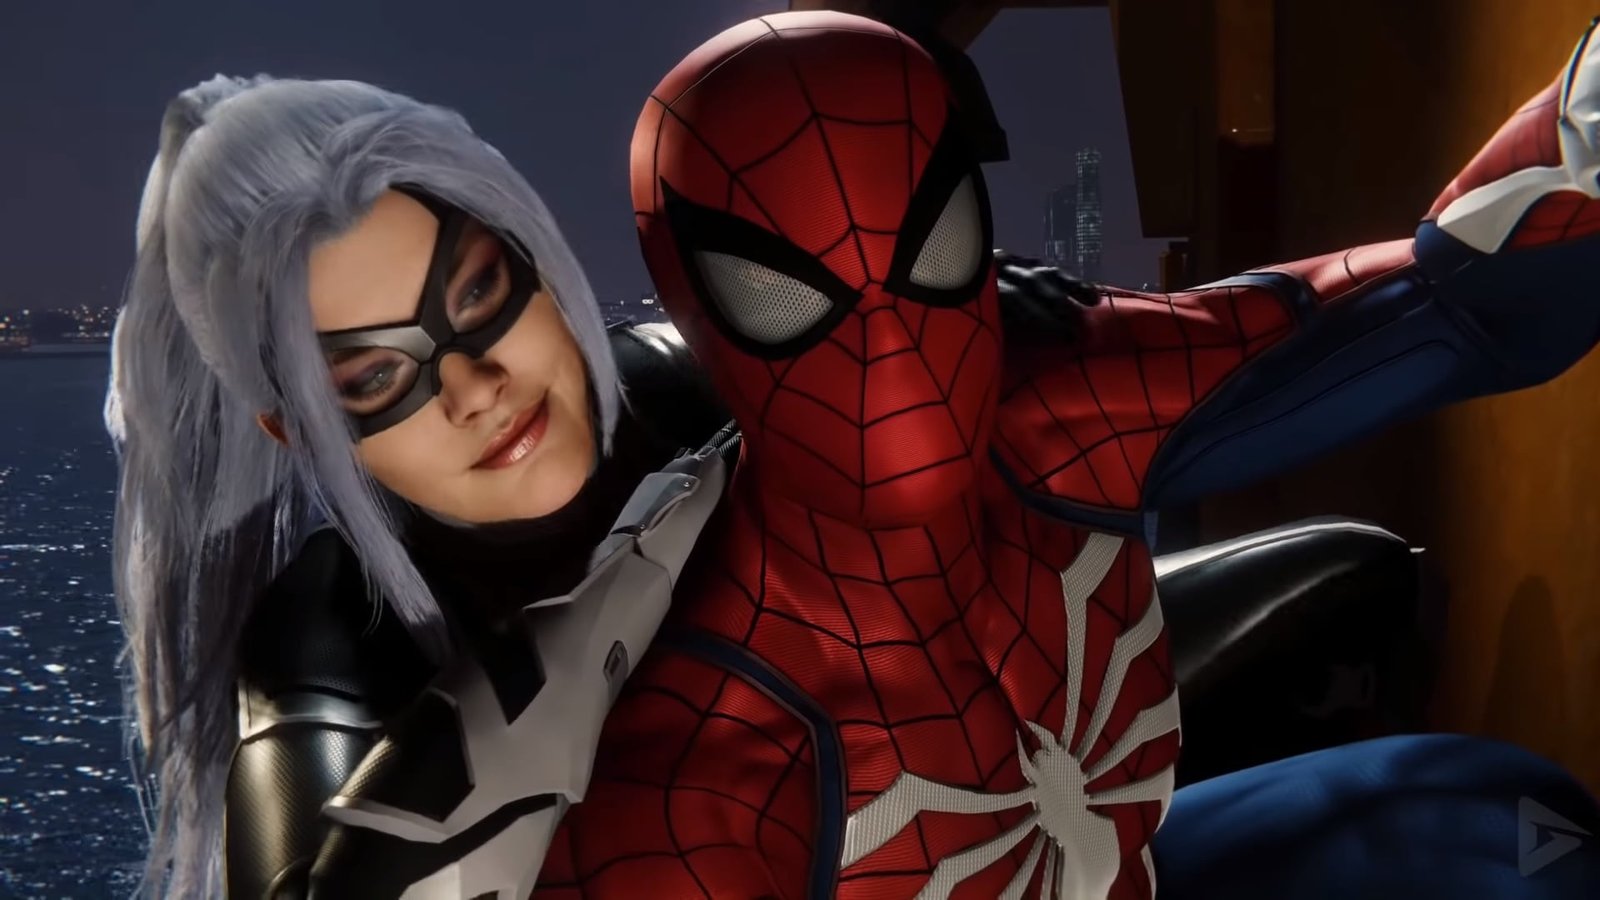 Review – Marvel’s Spider-Man: The Heist